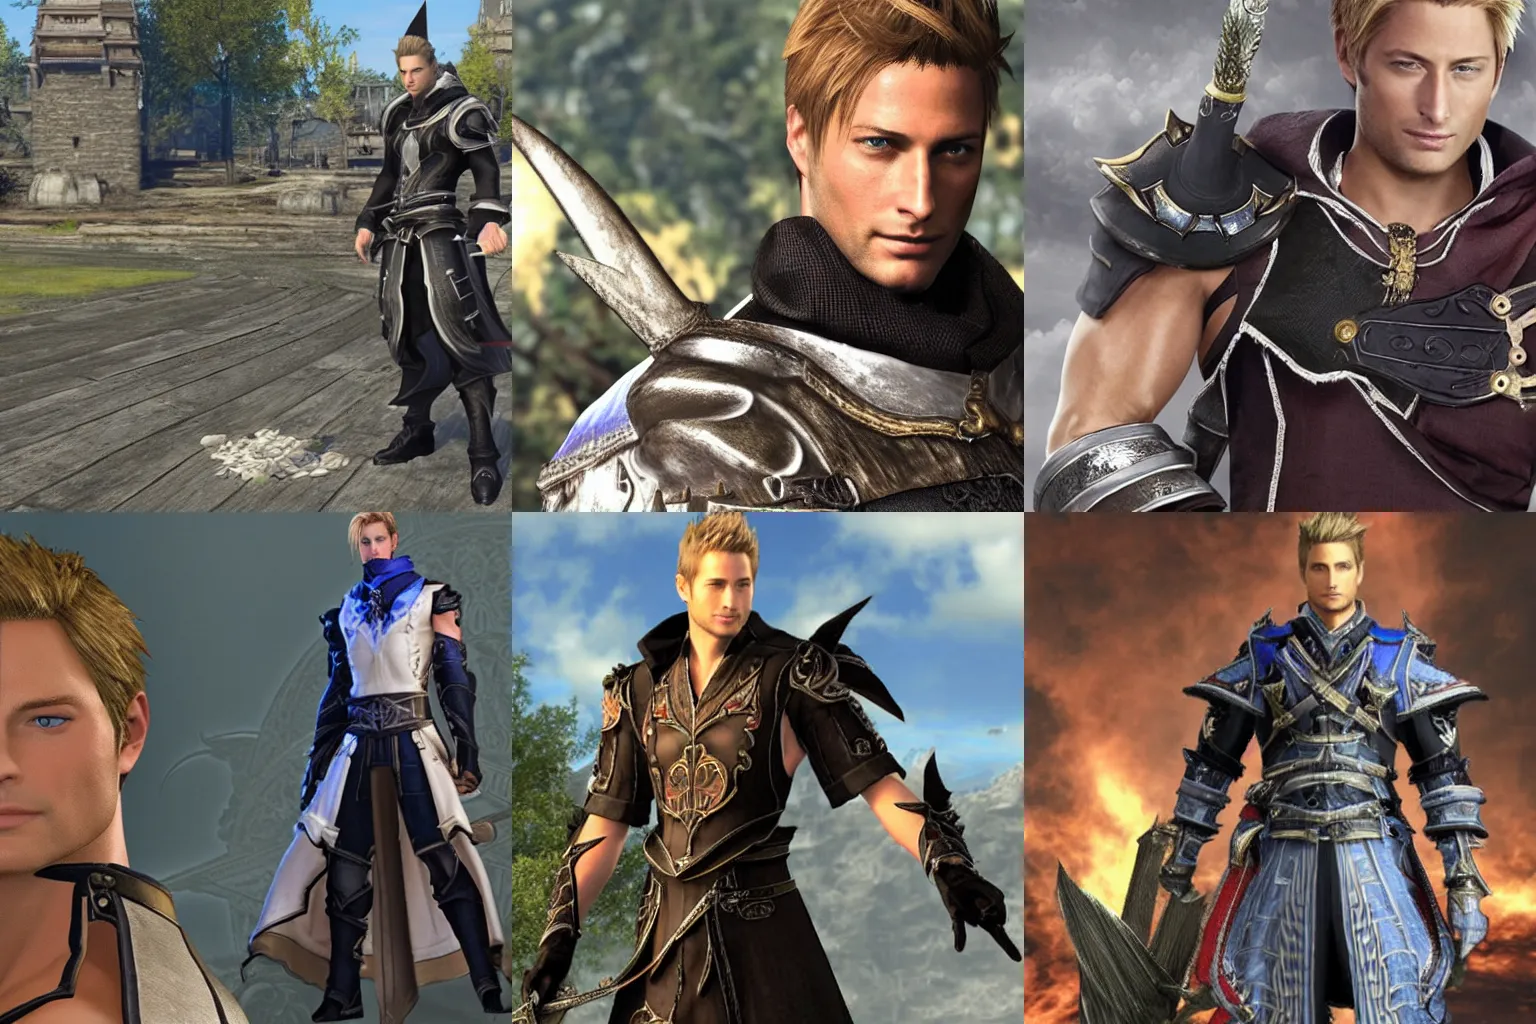 Prompt: Justin Hartley as a character in Final Fantasy XIV